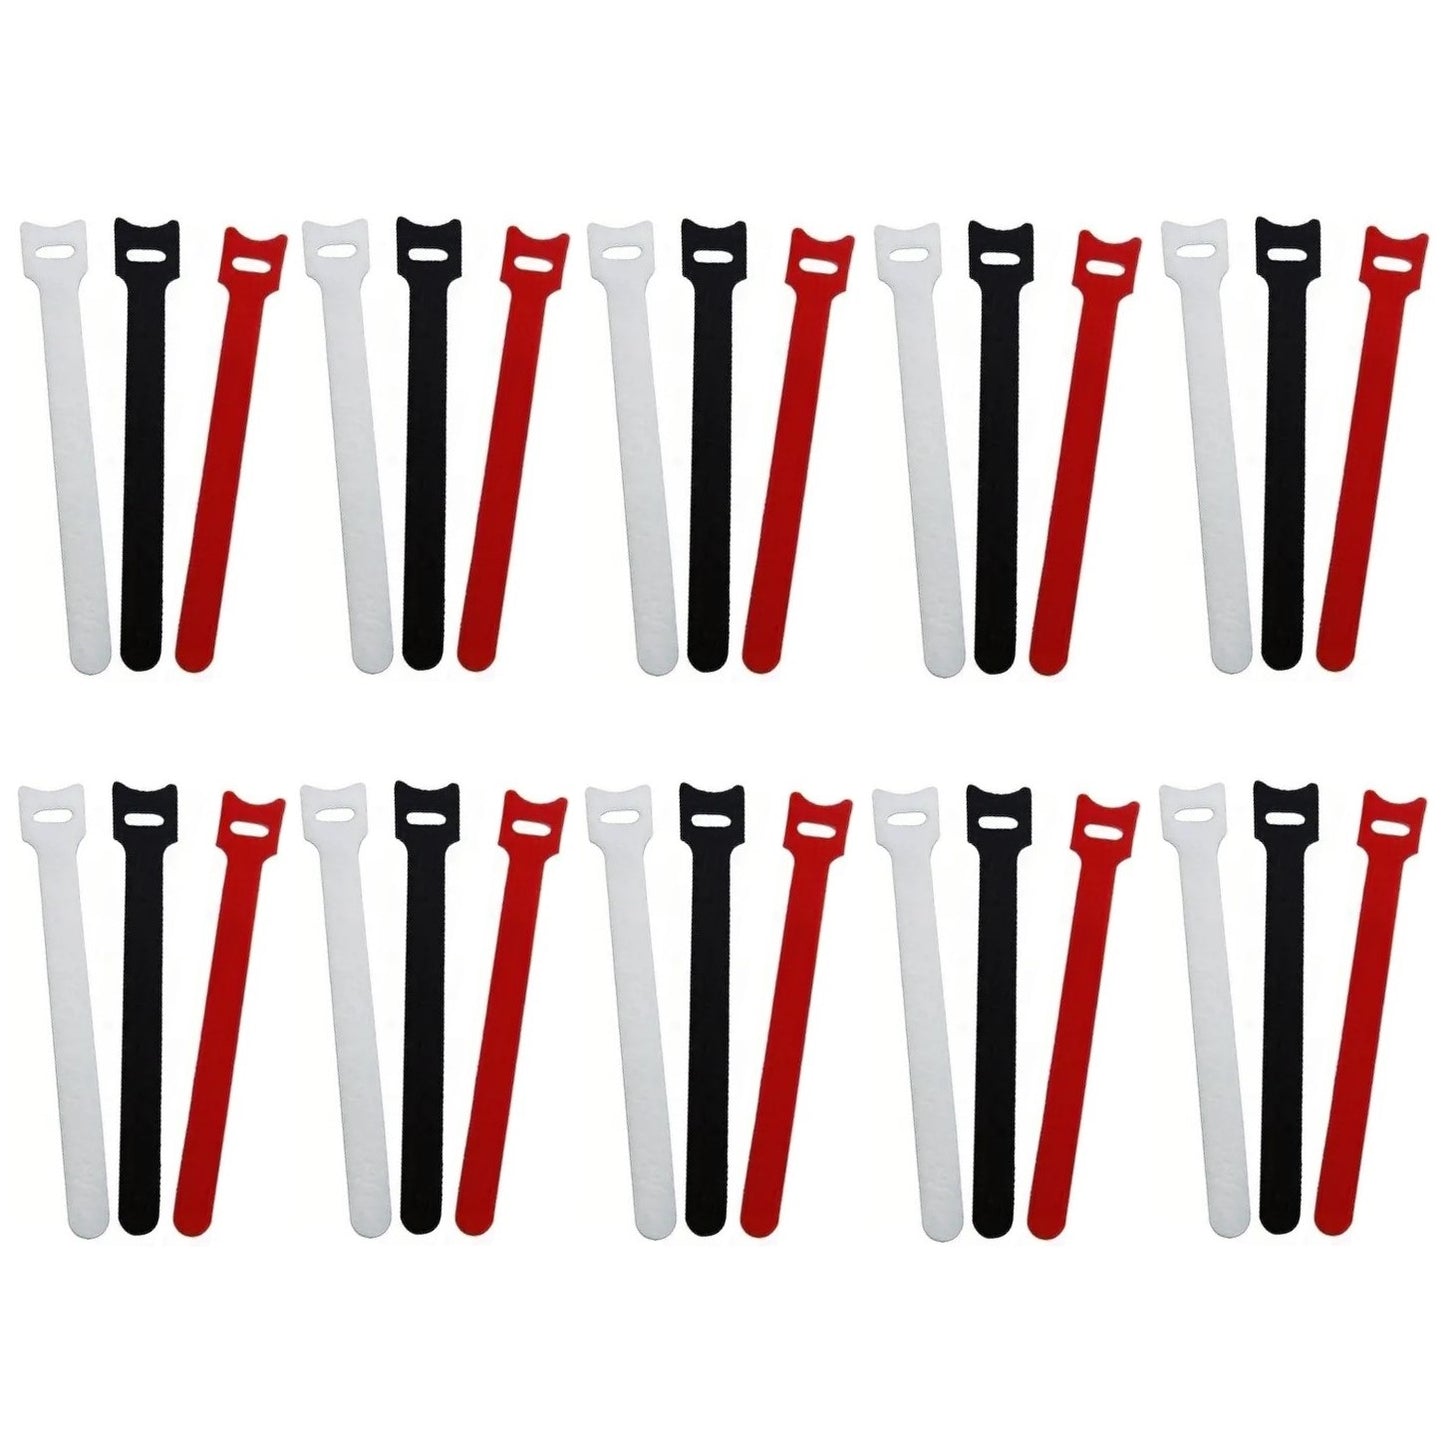 30 x Fastening Microfiber Cloth Cable Ties Reusable: Red, White, Black 15cm